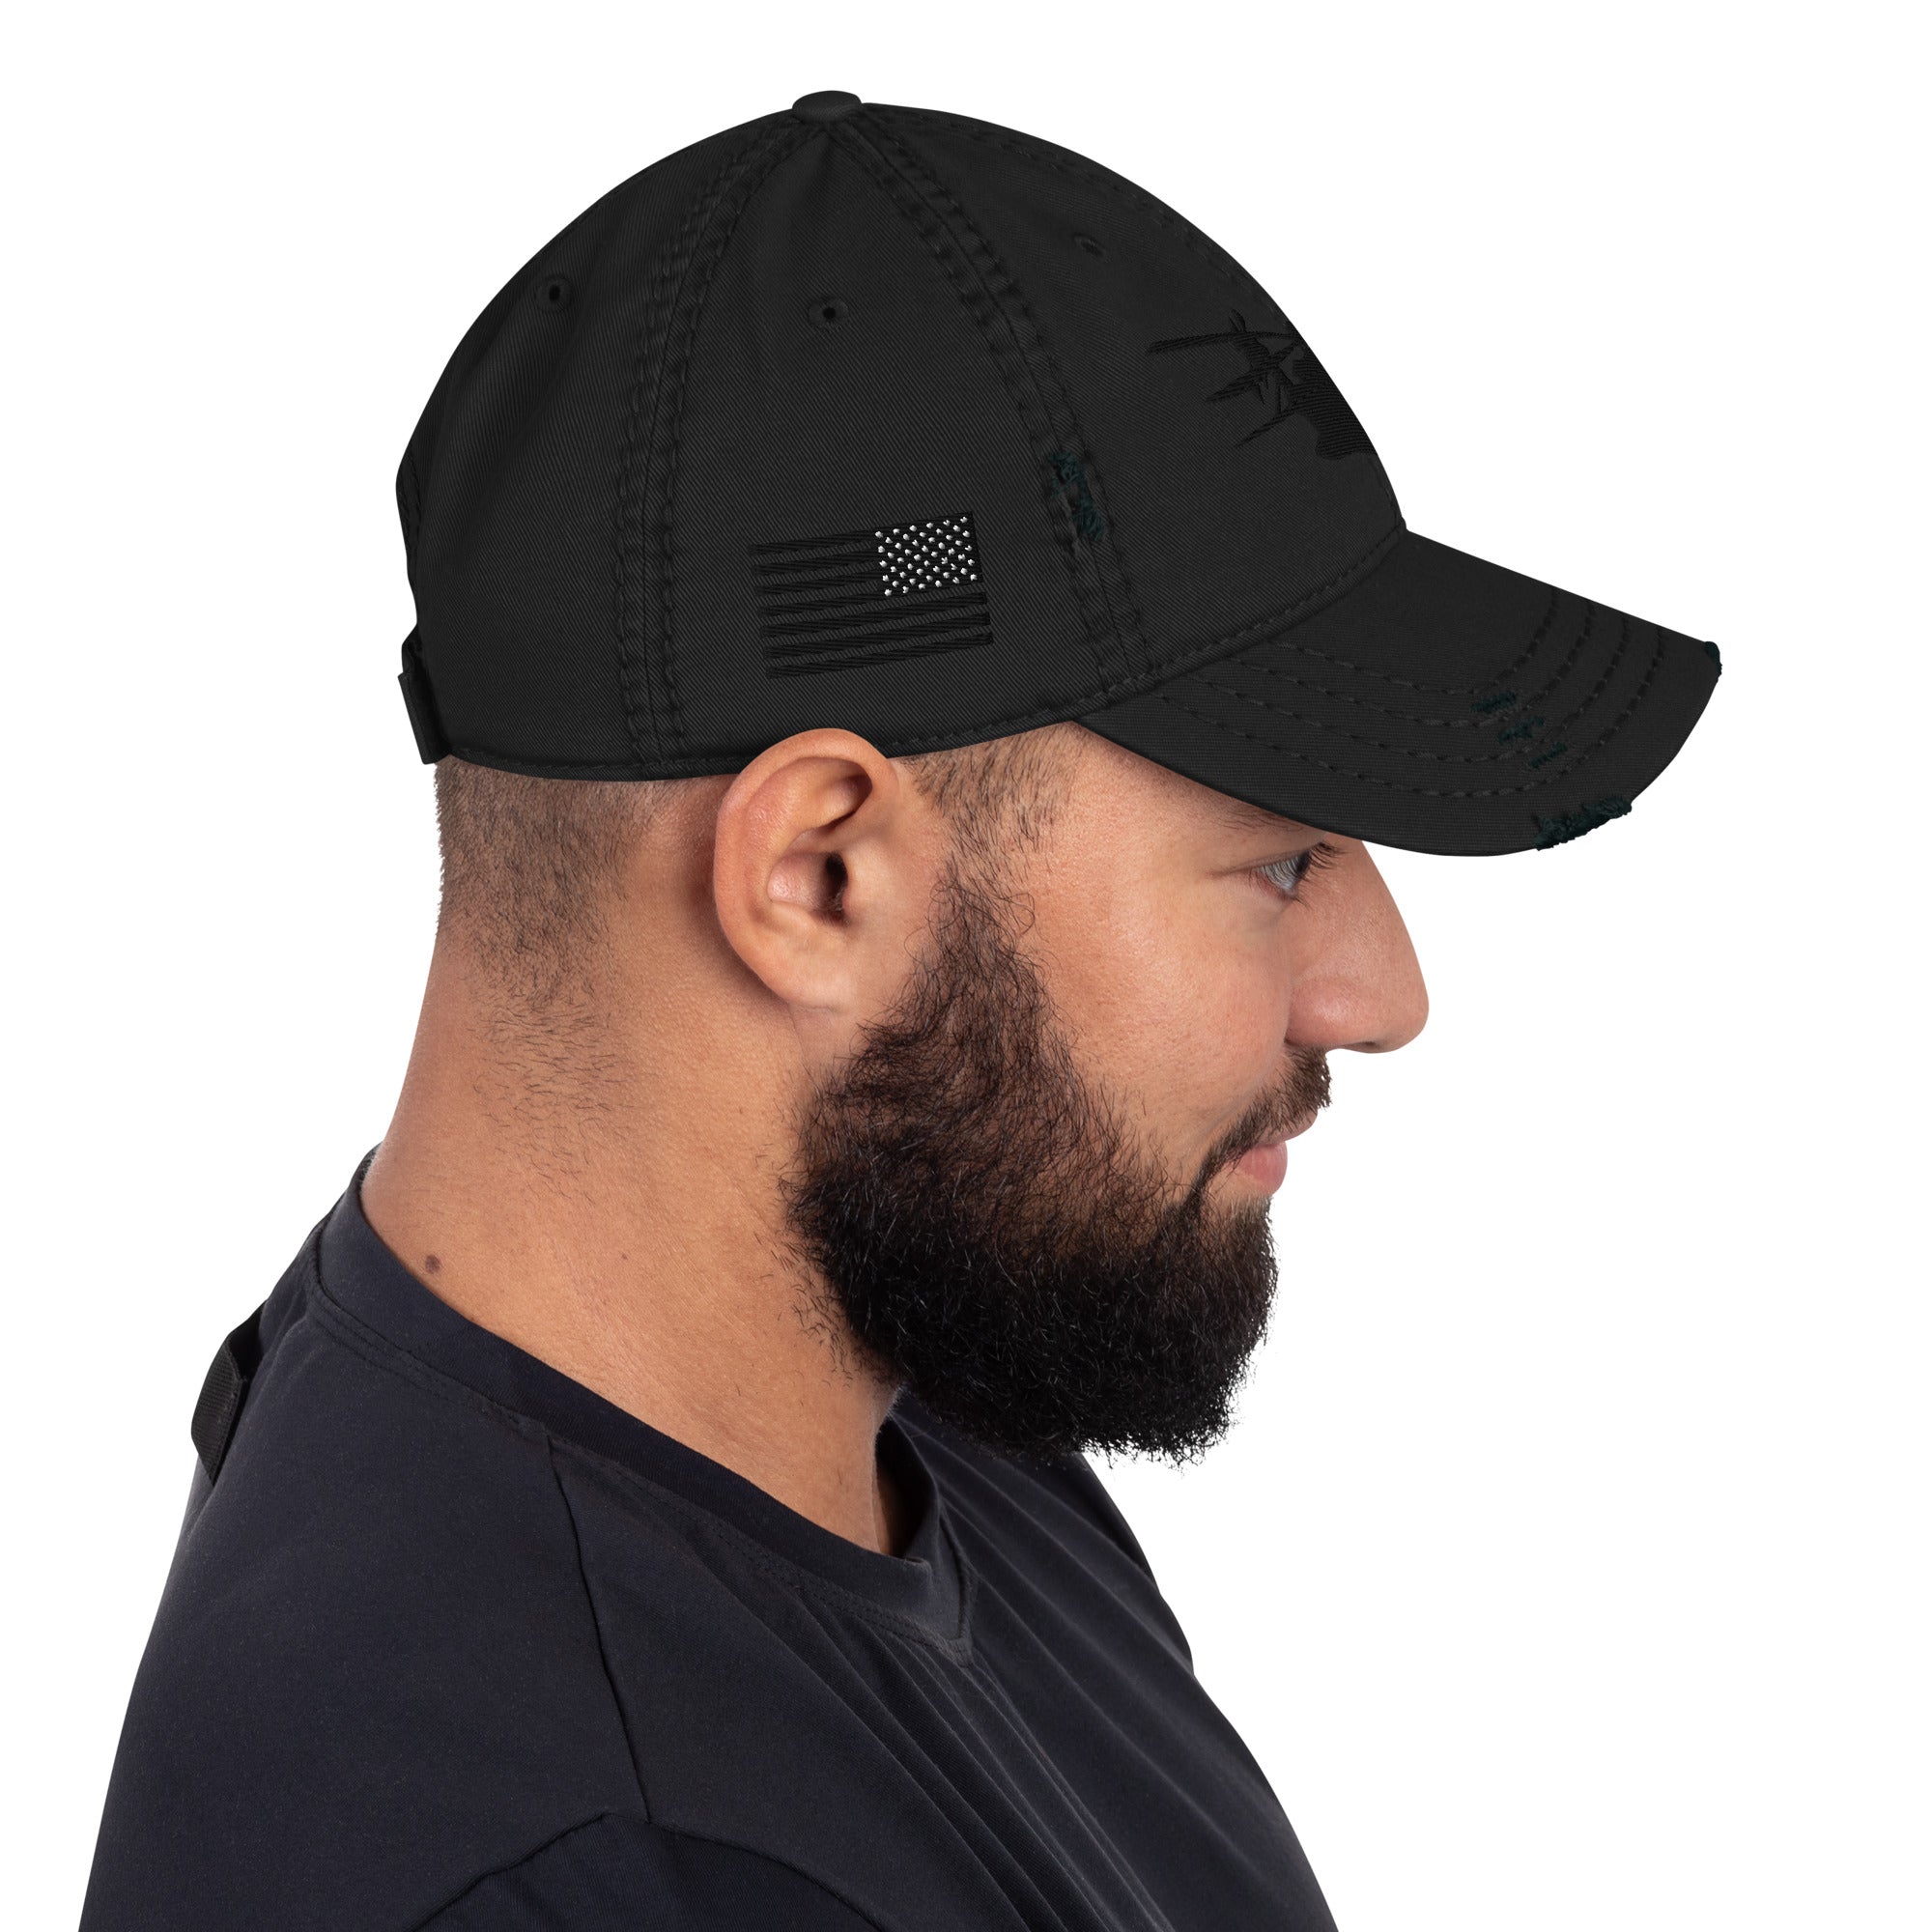 S-92 Distressed Dad Hat by Ruck & Rotor